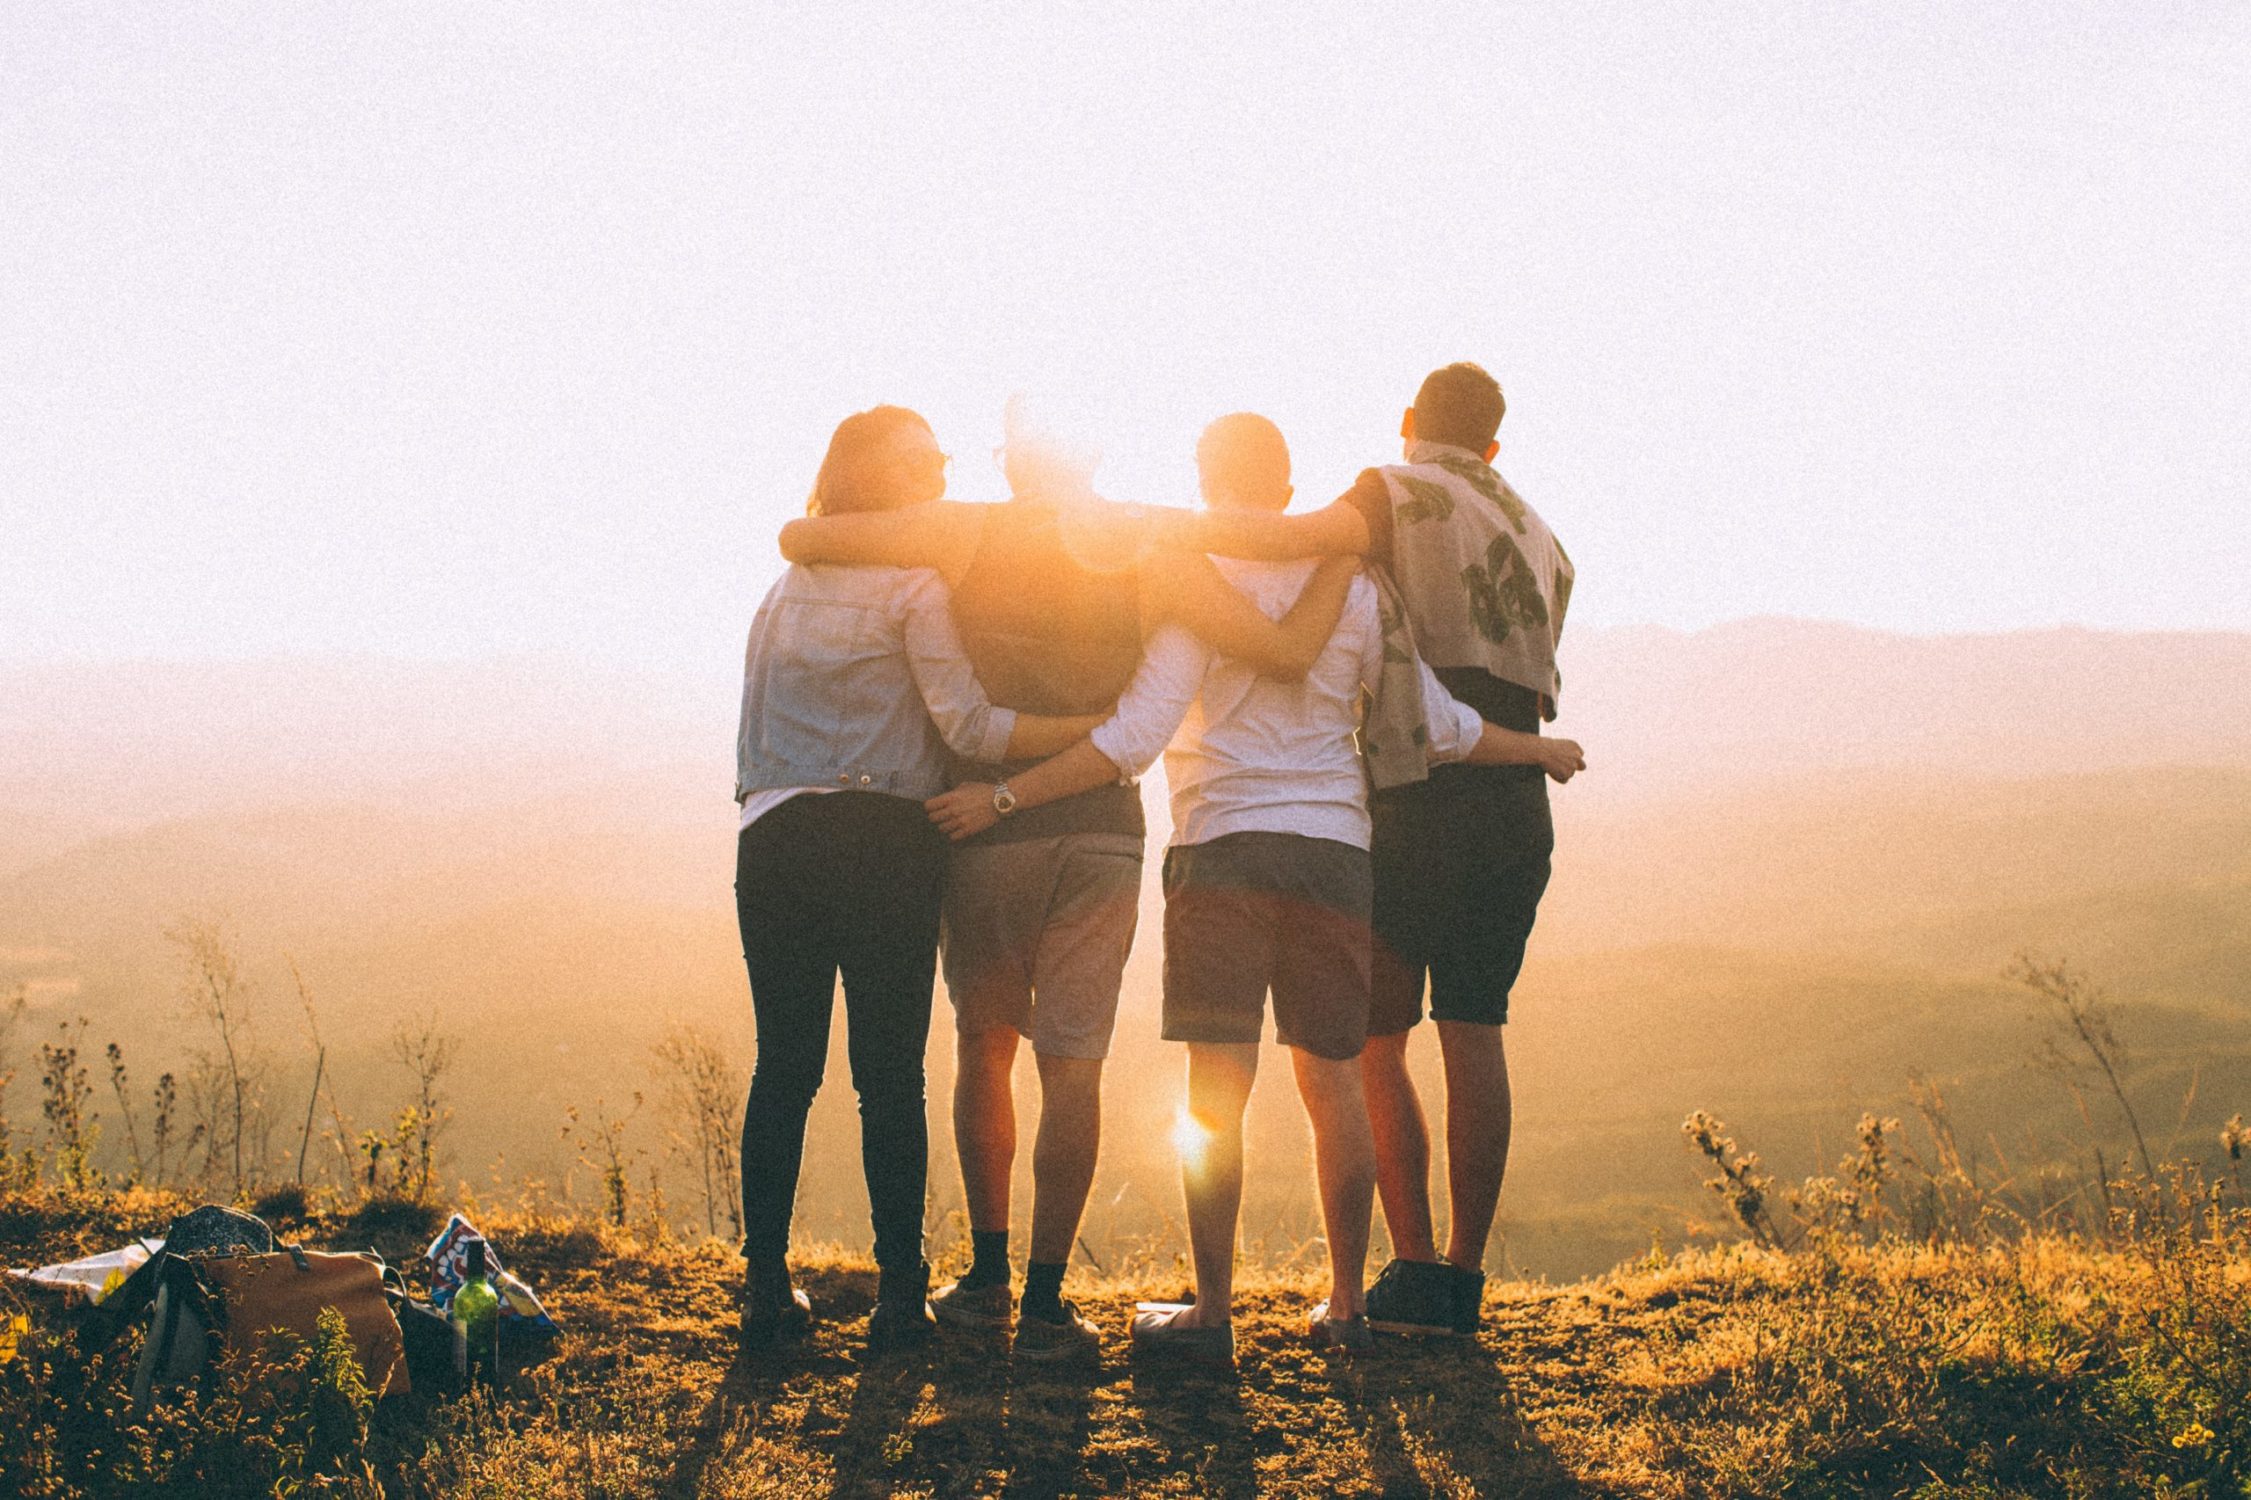 A group of young people, hugging and looking at a sunset.